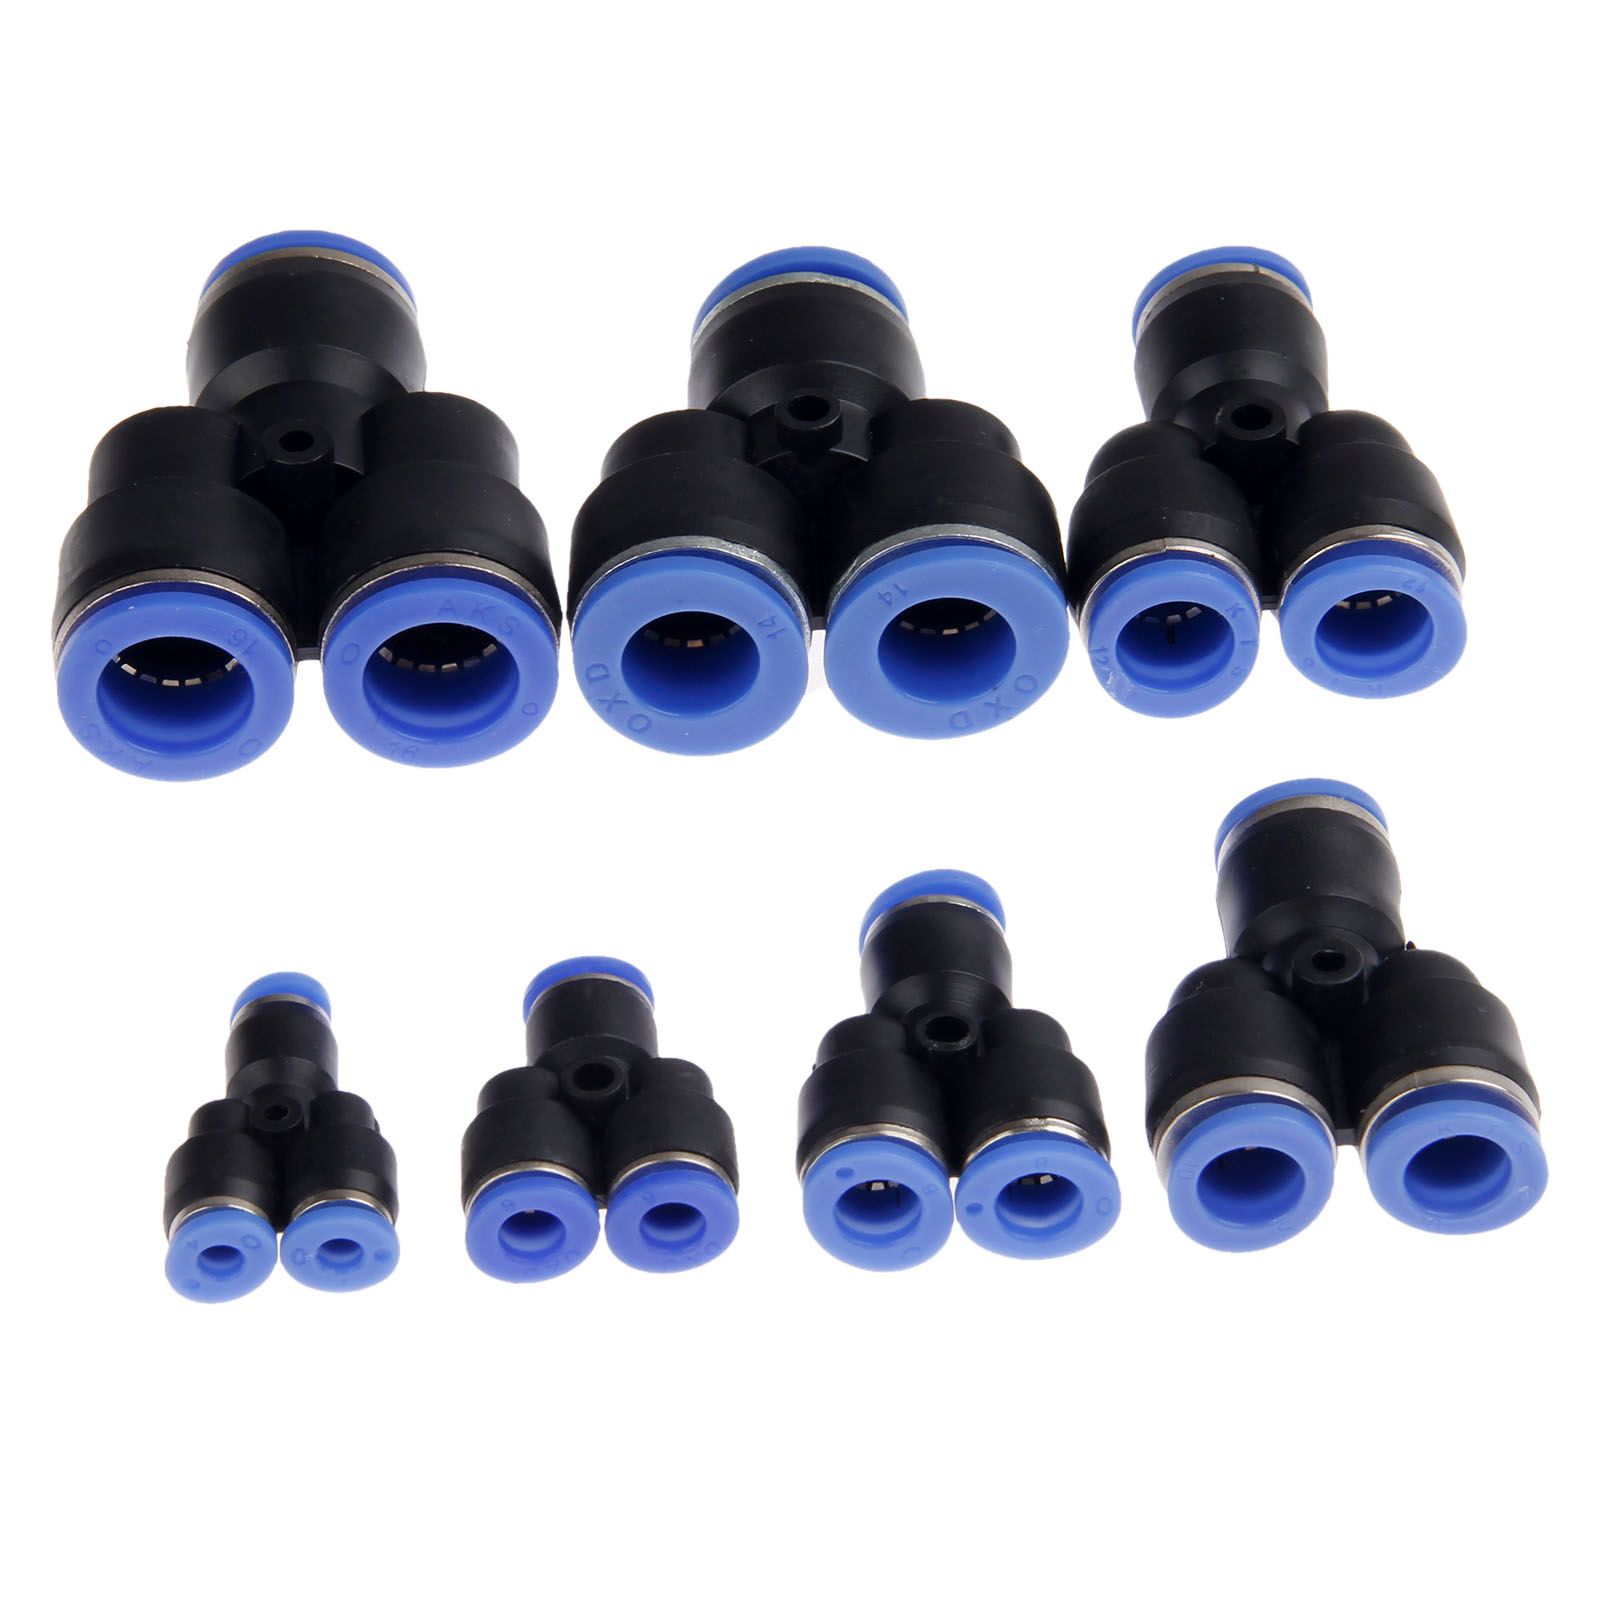 5Pcs/Lot Pneumatic Parts 3 Way Air Pneumatic Connector Y Union 4/6/8/10/12mm Tube Pipe Quick Joint Fittings Push in Connectors